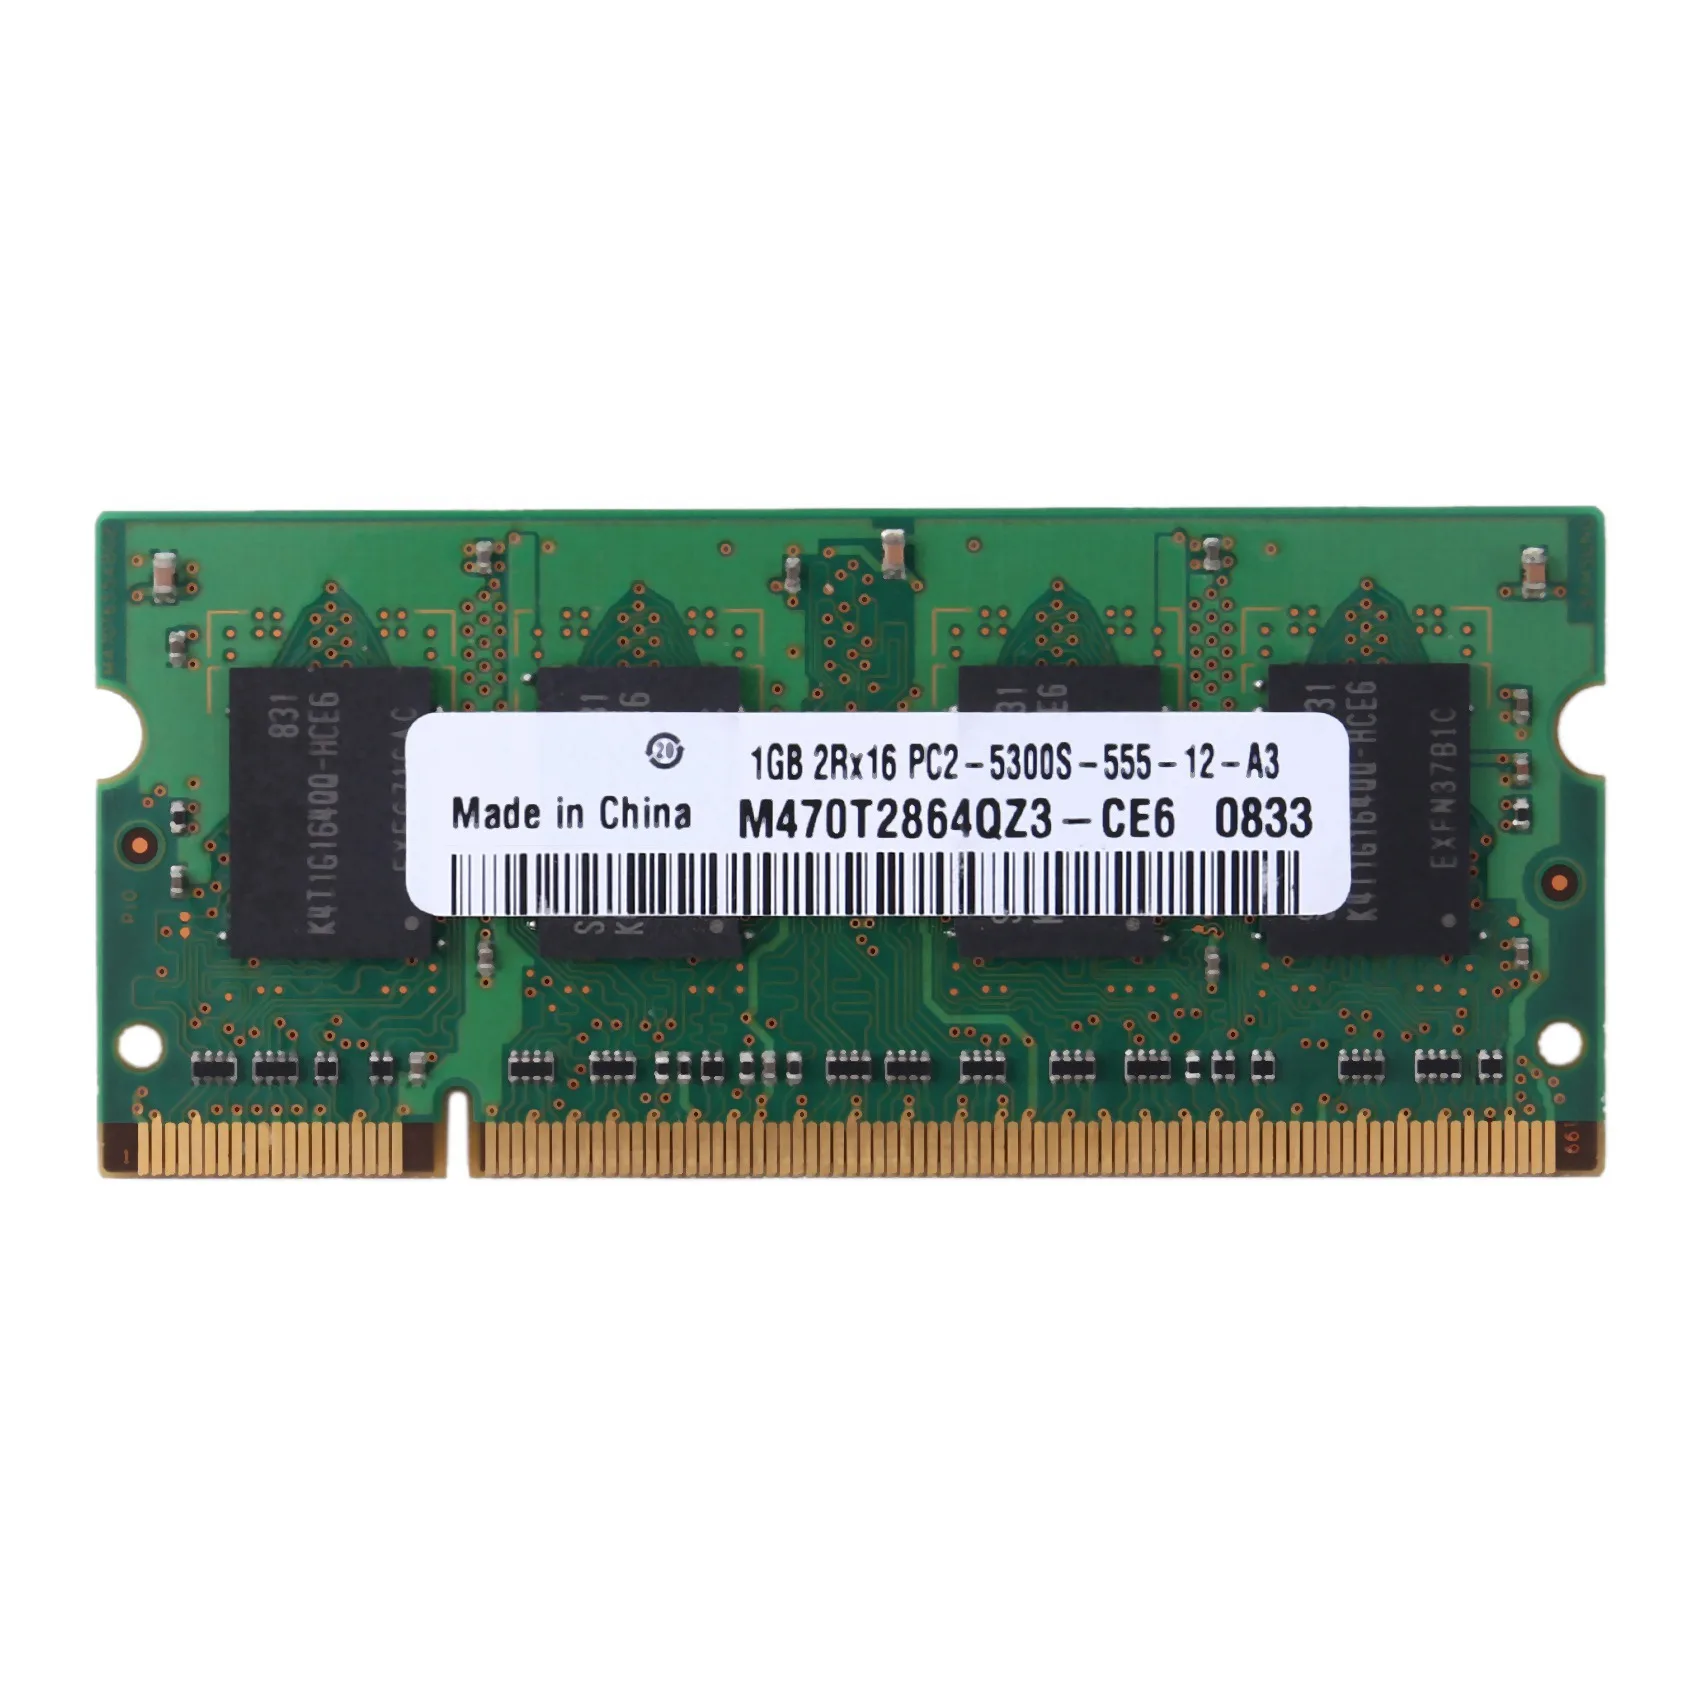 

DDR2 1GB Notebook RAM Memory 677Mhz PC2-5300S-555 200Pins 2RX16 SODIMM Laptop Memory for Intel AMD